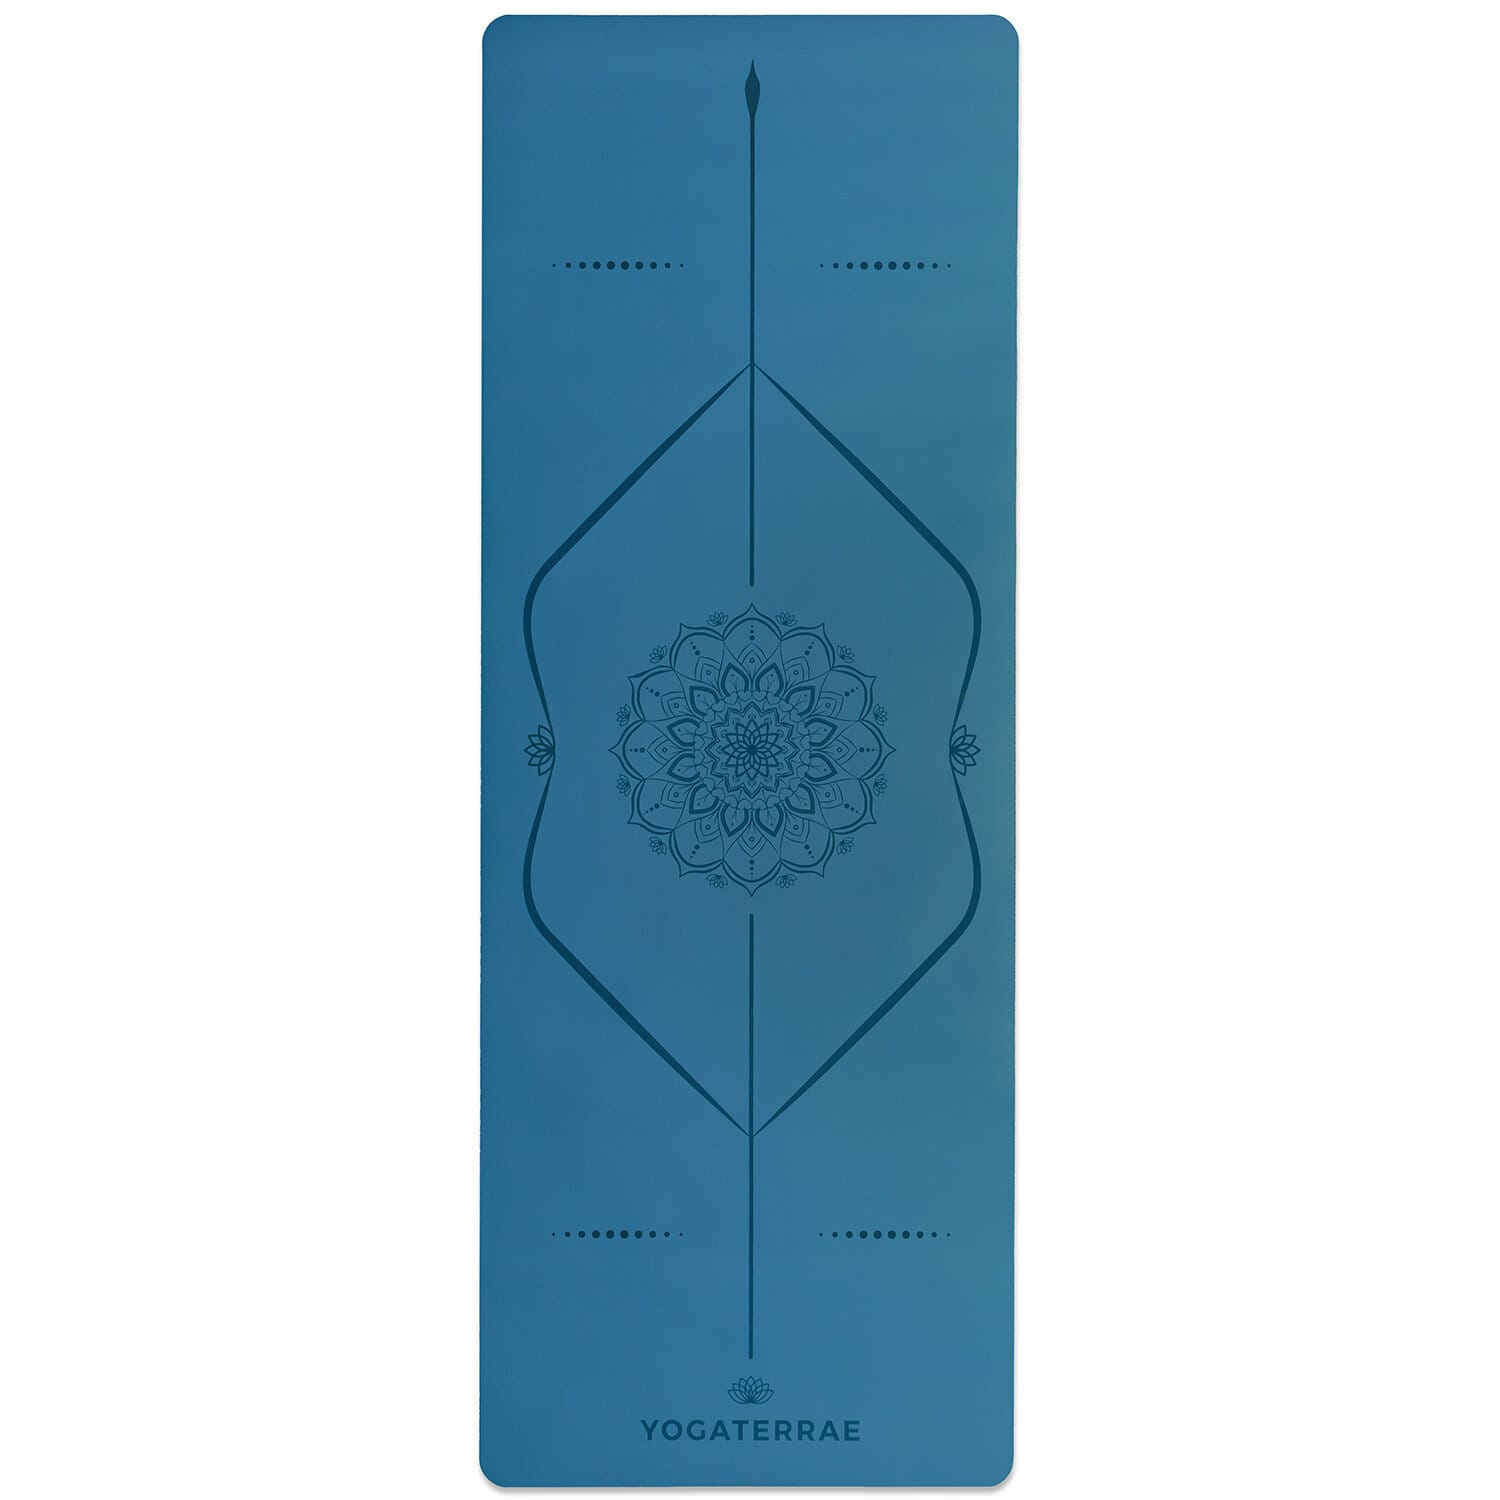 Tapis de protection sol 100% recyclable ECODURABLE